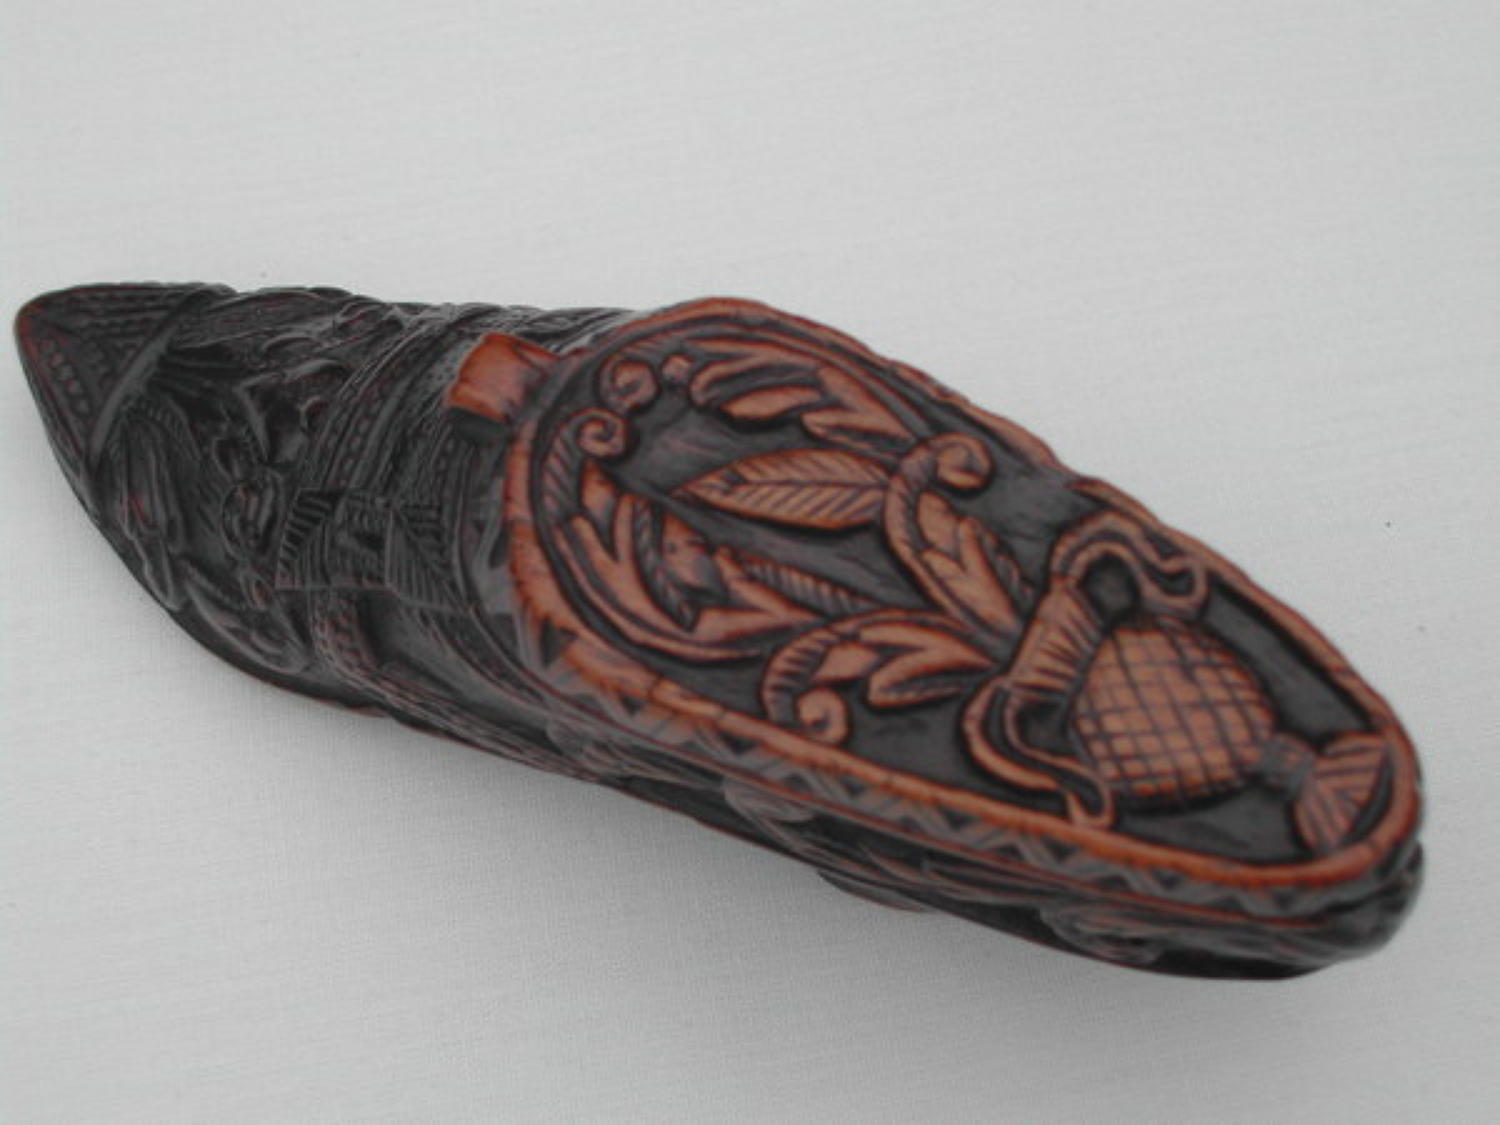 A 18thc Fruitwood Snuff Box in the shape of a shoe. English C1770 - 80